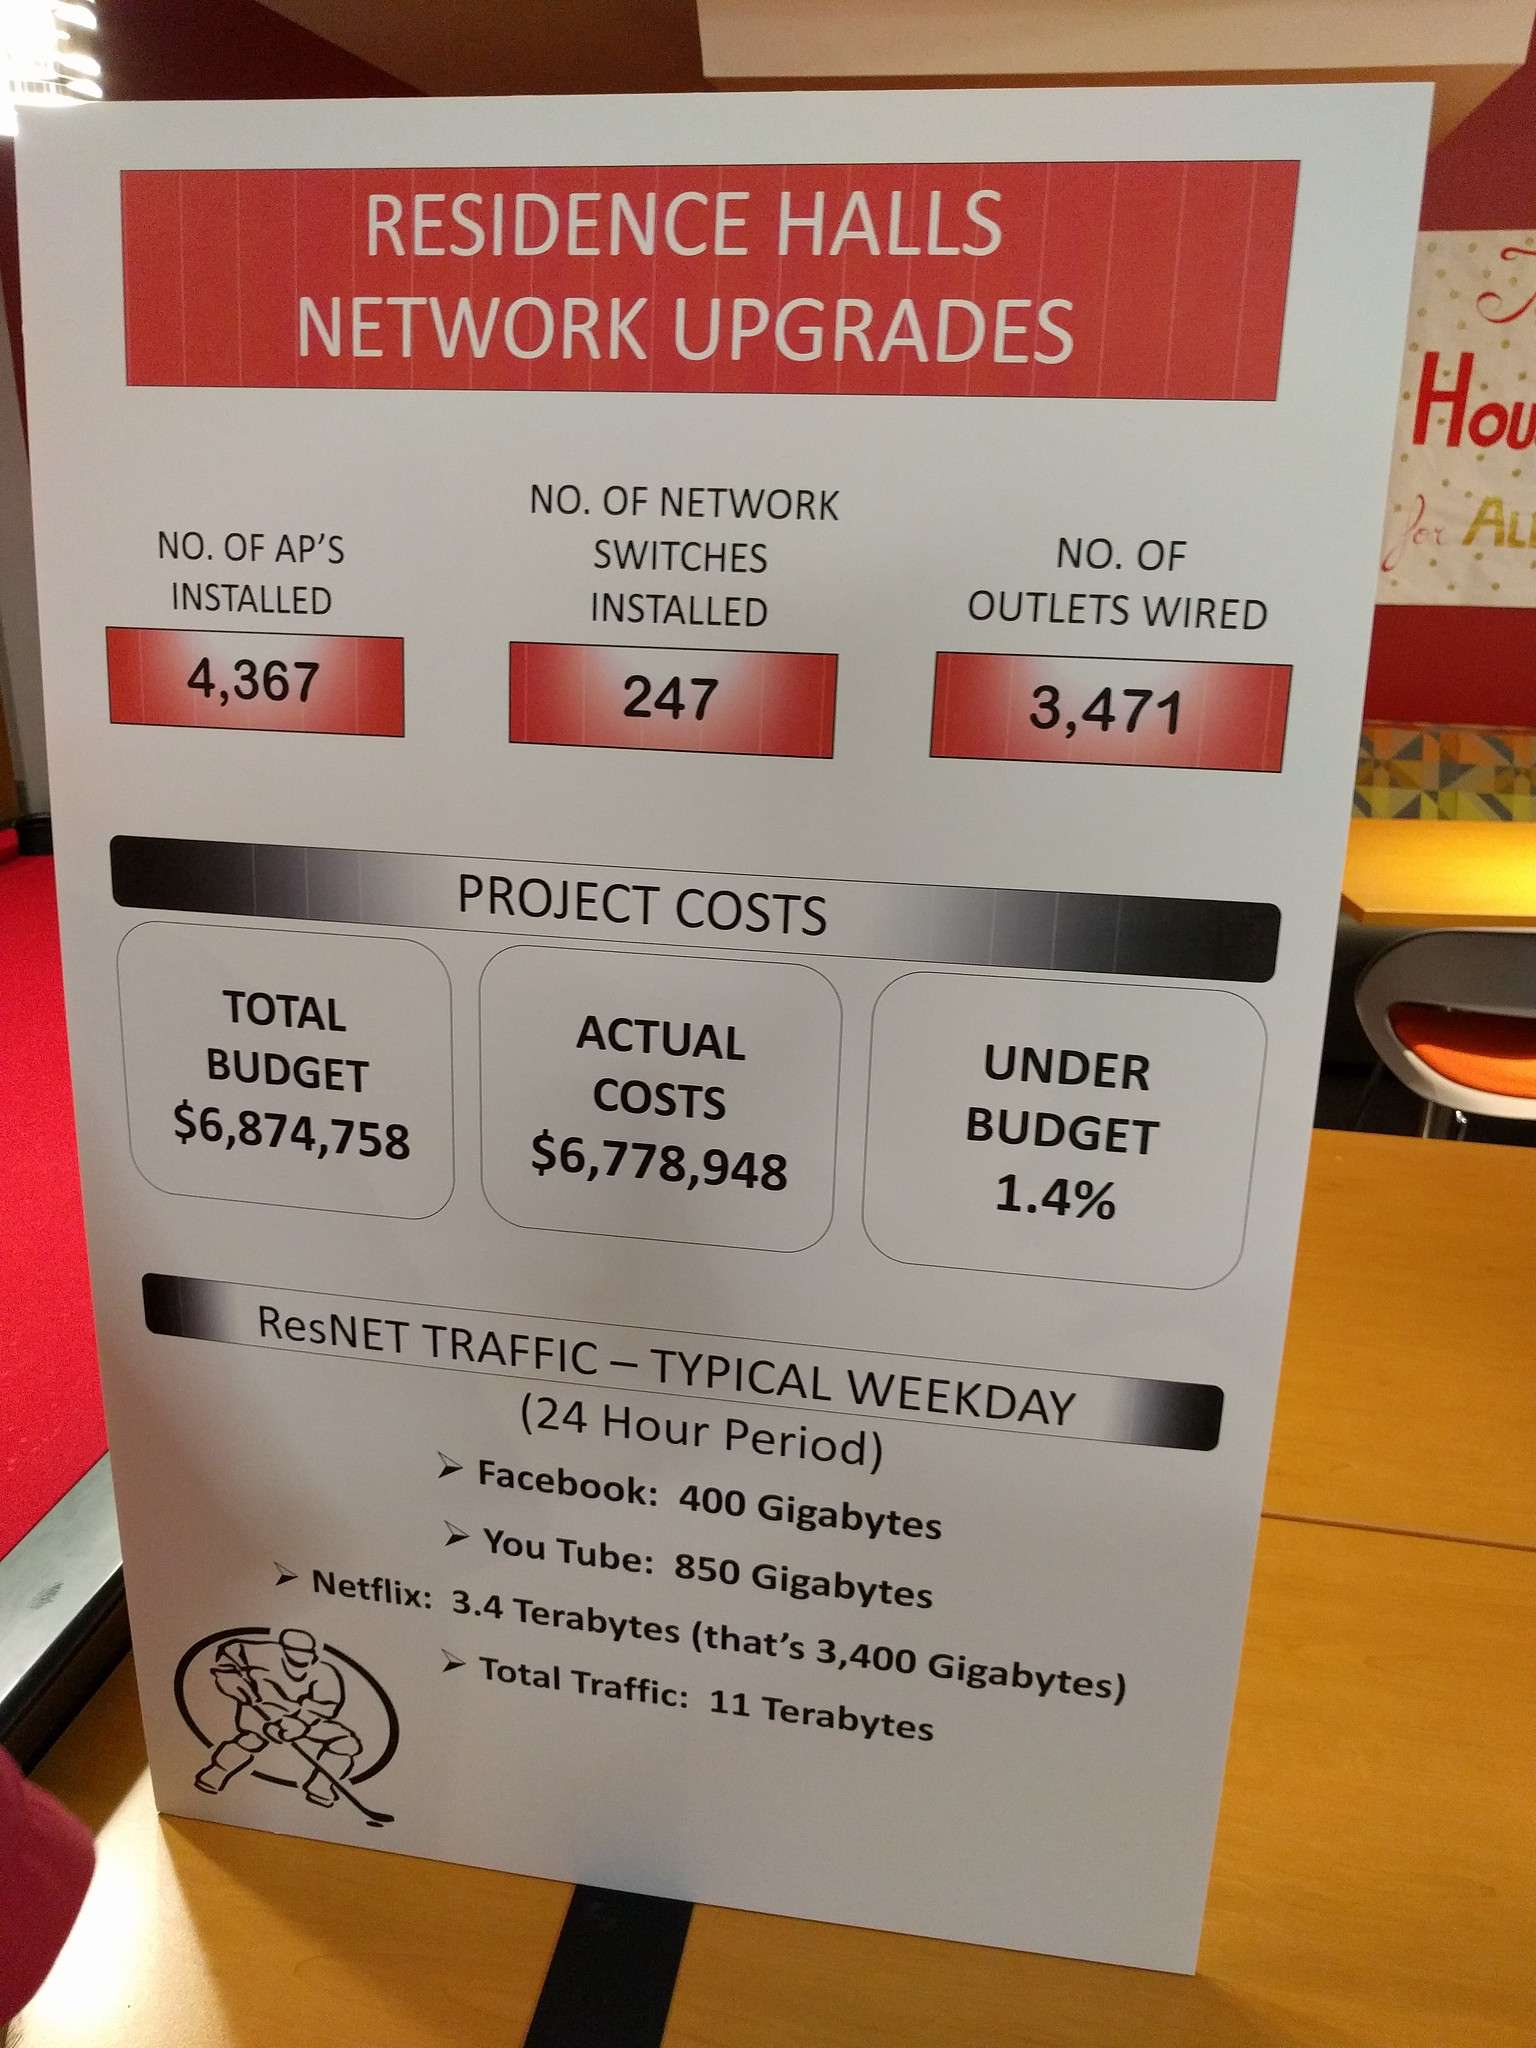 A poster highlighting statistics from the residence hall network upgrades.